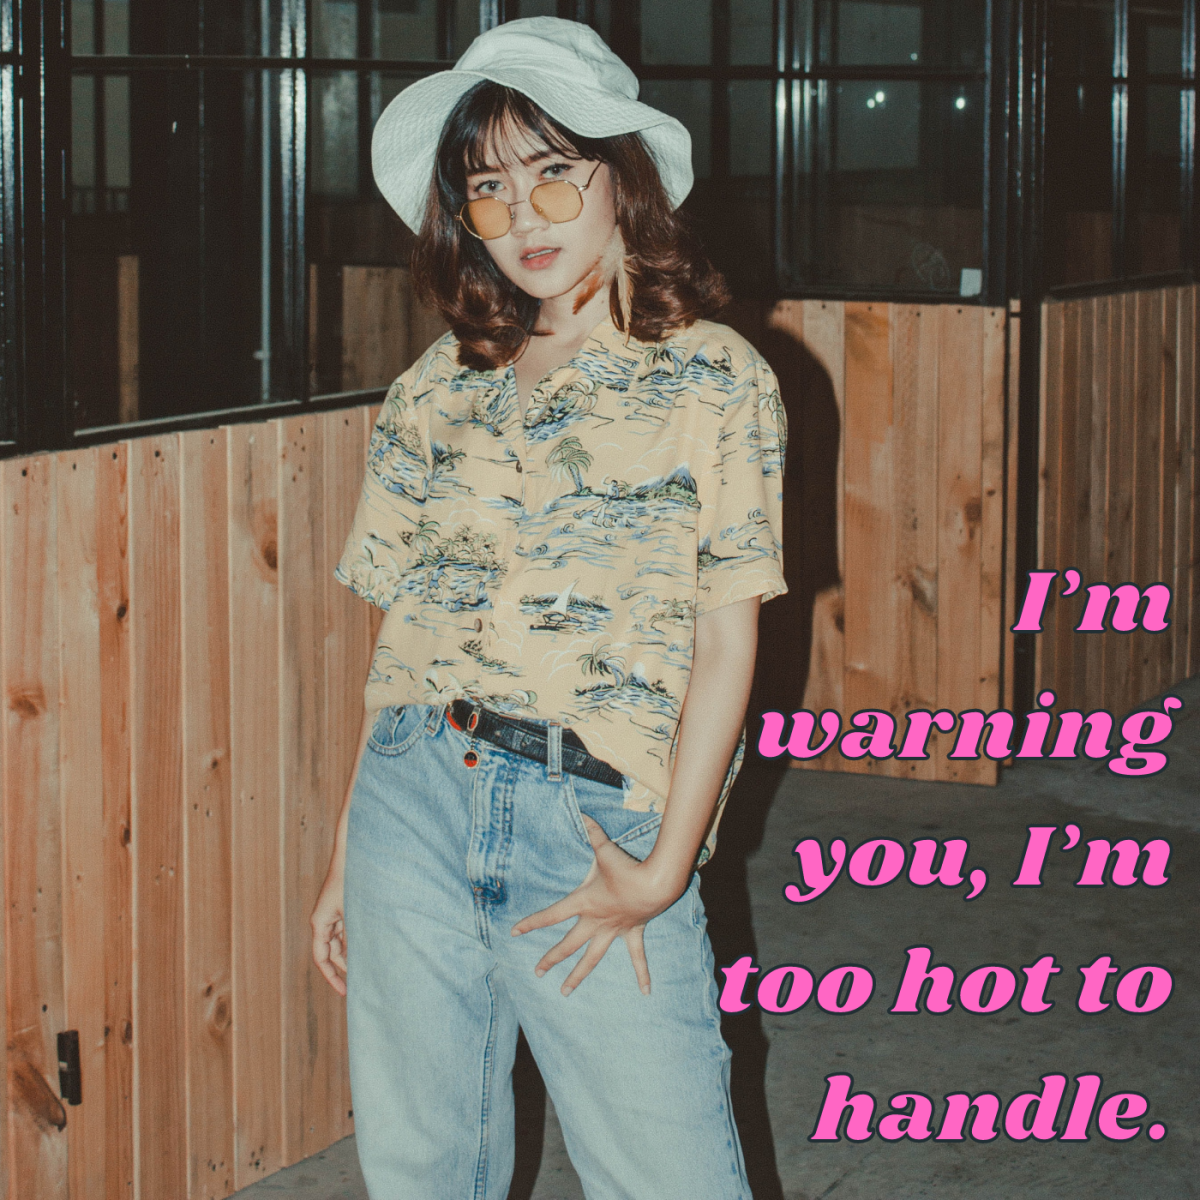 I’m warning you, I’m too hot to handle.